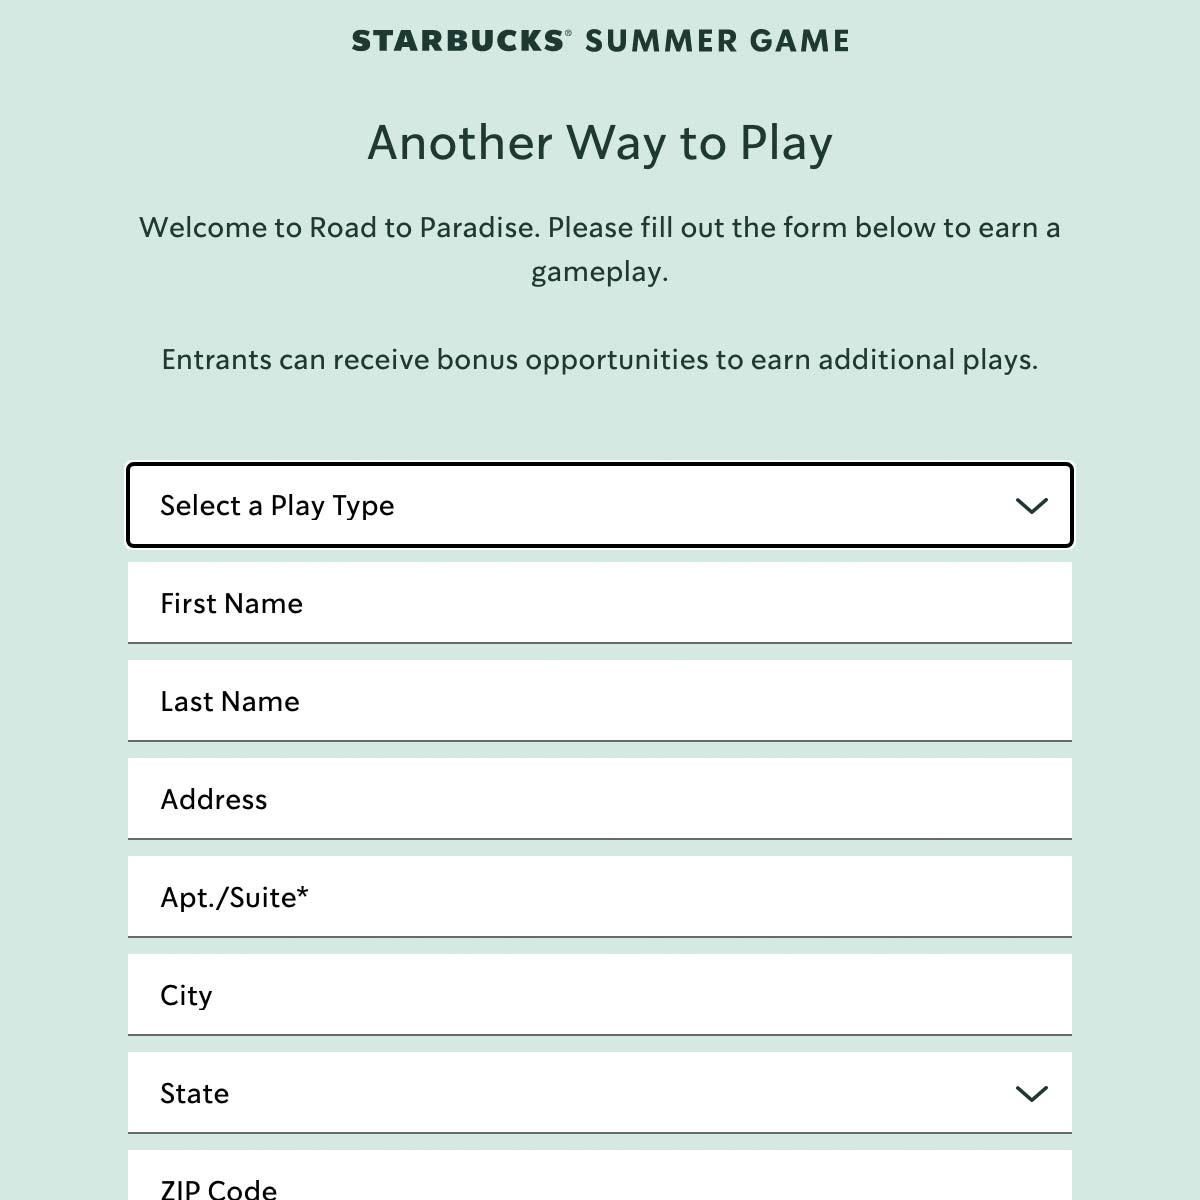 Starbucks Summer Game 2022 Another Way to Play entry form.